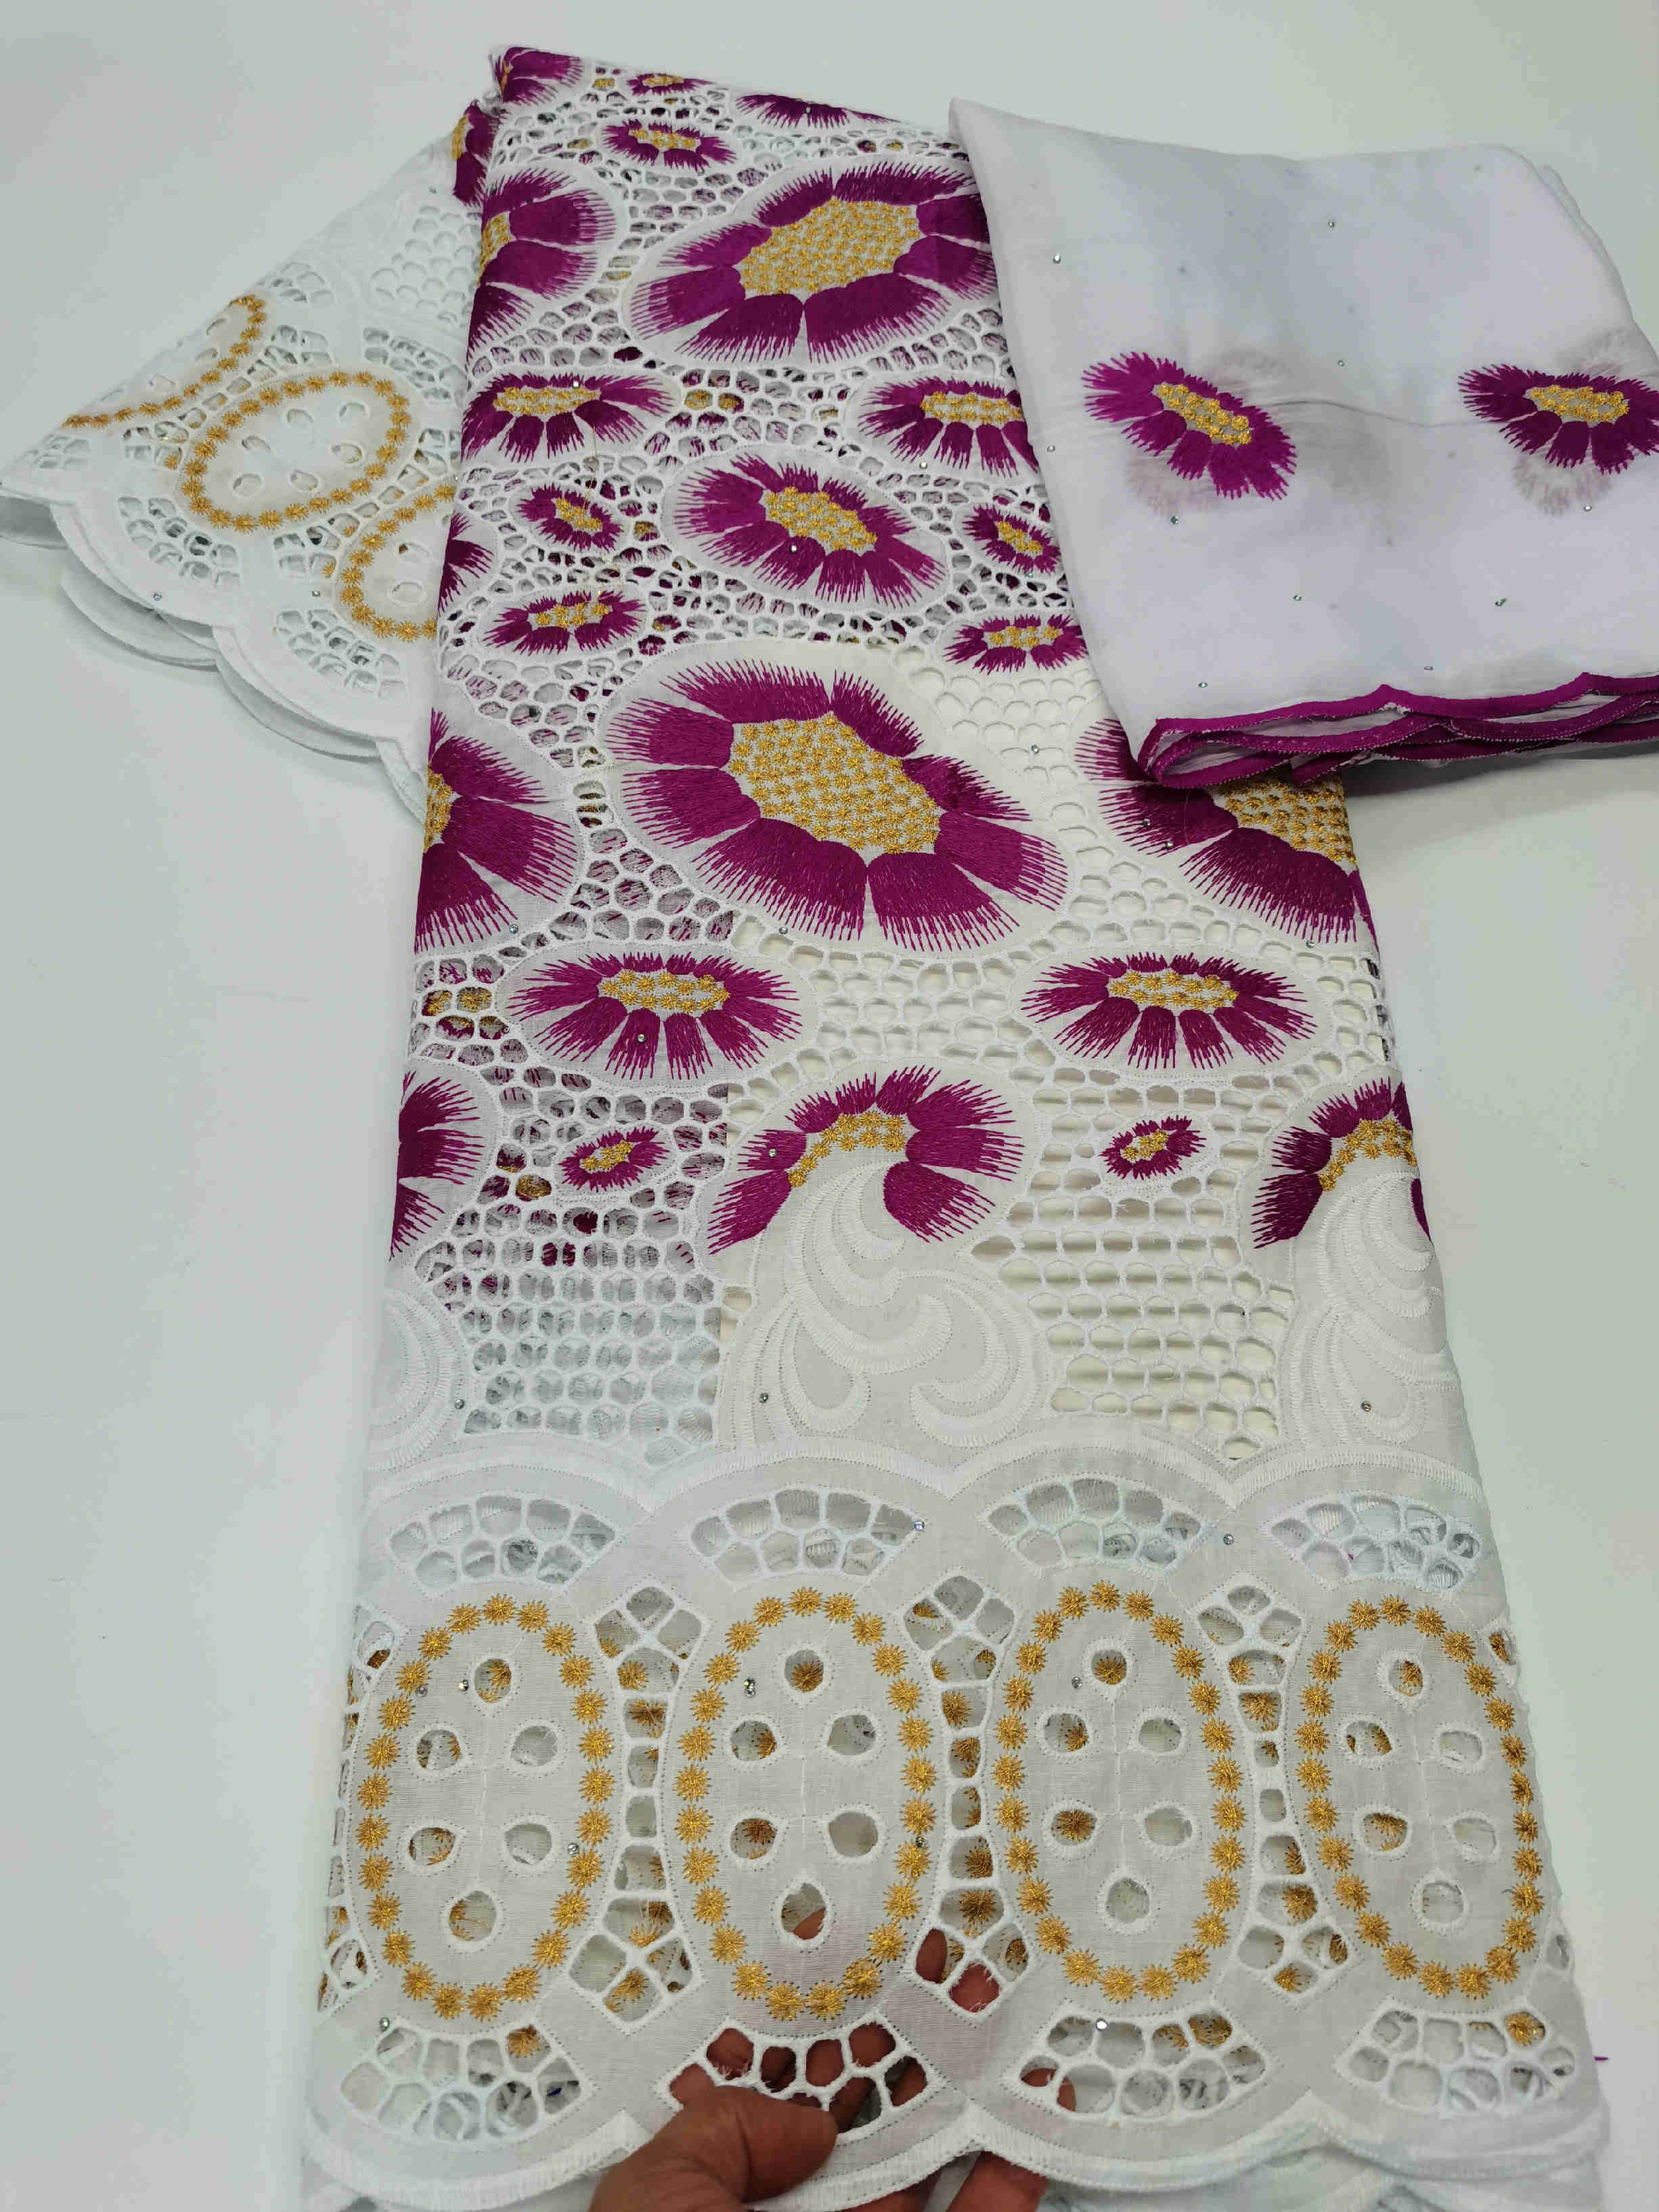 Dubai Fabric African 100%Cotton Lace Fabric 2021 High Quality Lace Material In Switzerland Embroidery Swiss Voile Lace Fabric 7Y